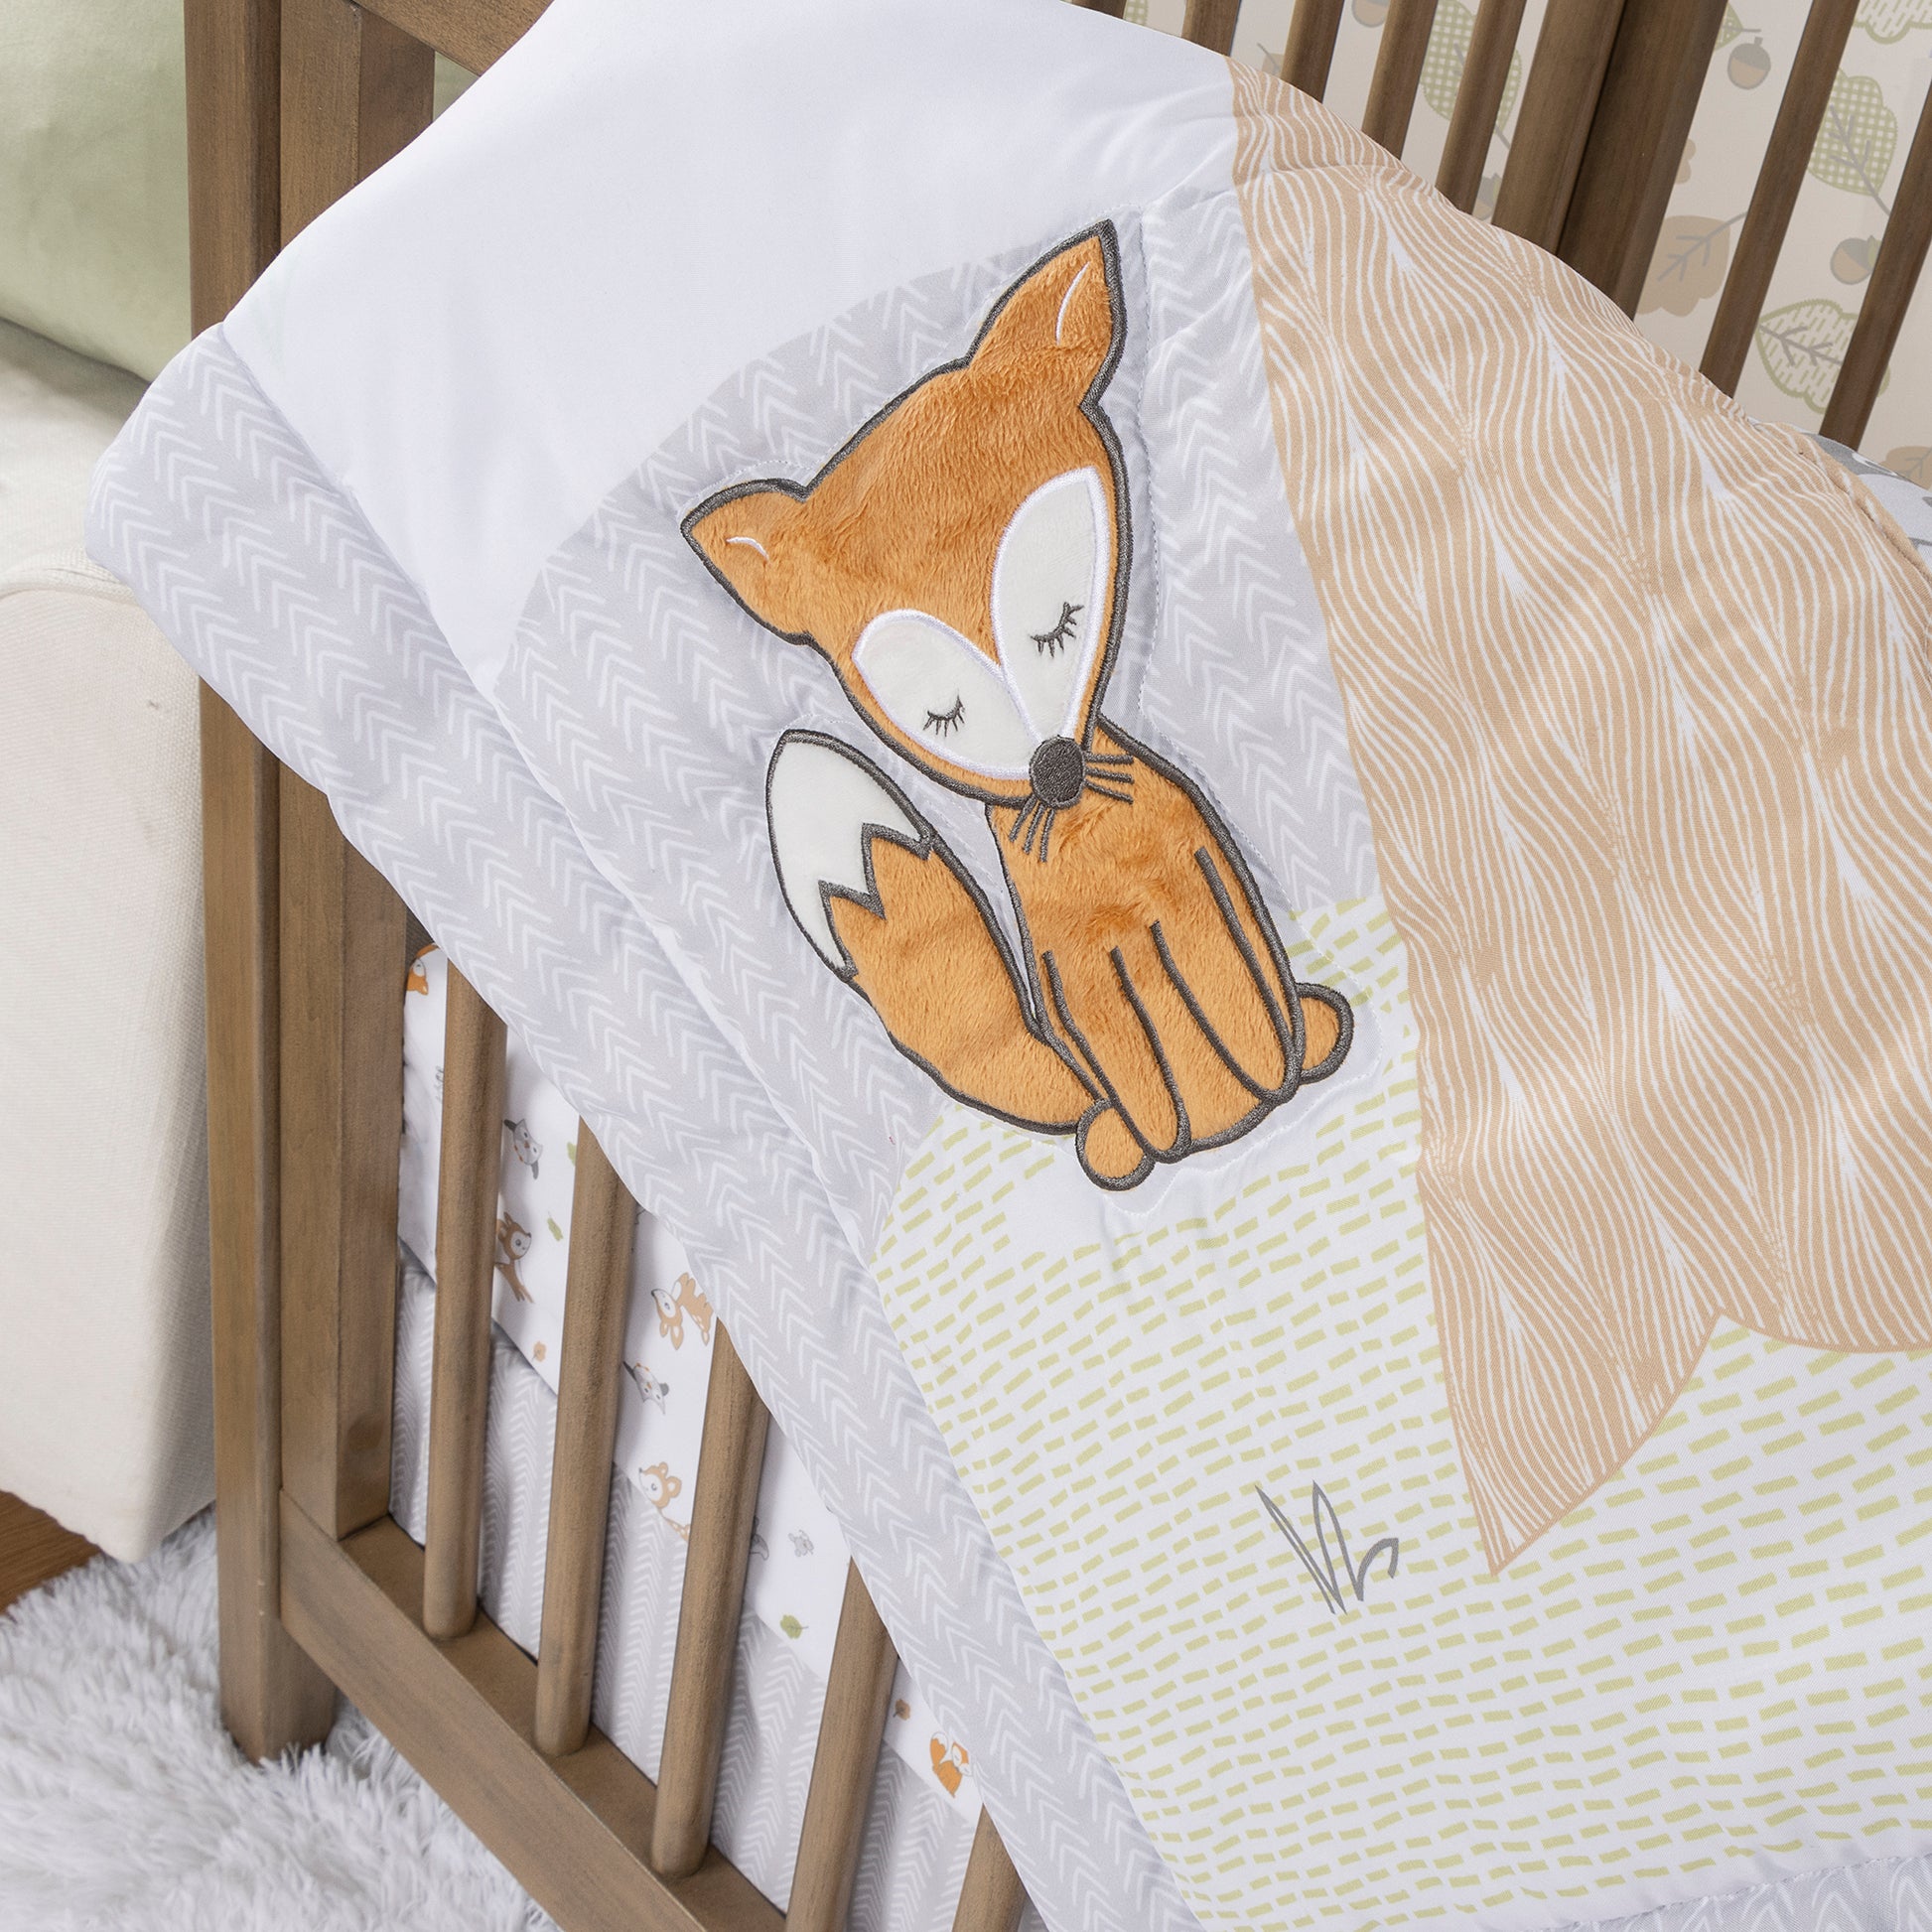  Friendly Forest 4 Piece Crib Bedding Collection by Sammy & Lou®;